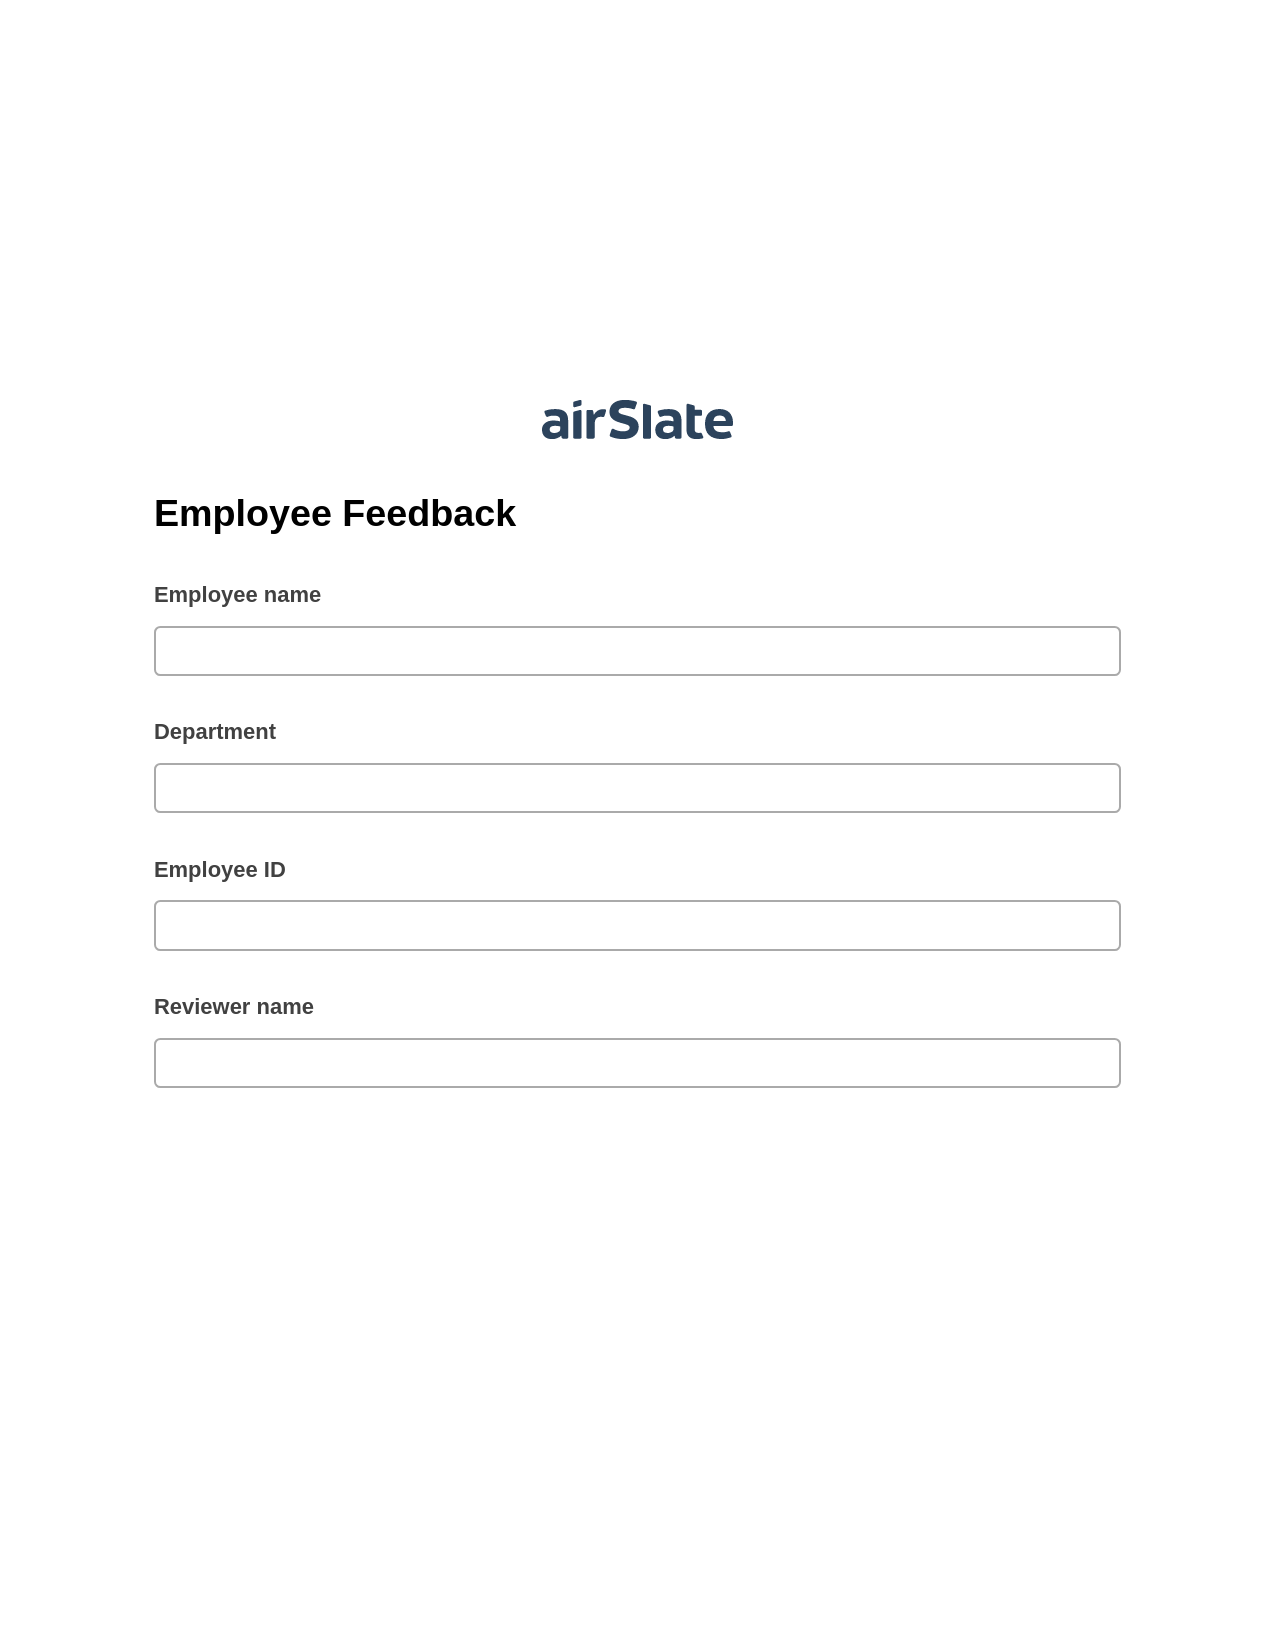 Employee Feedback Pre-fill from Salesforce Record Bot, In-person Signing Bot, Slack Notification Postfinish Bot